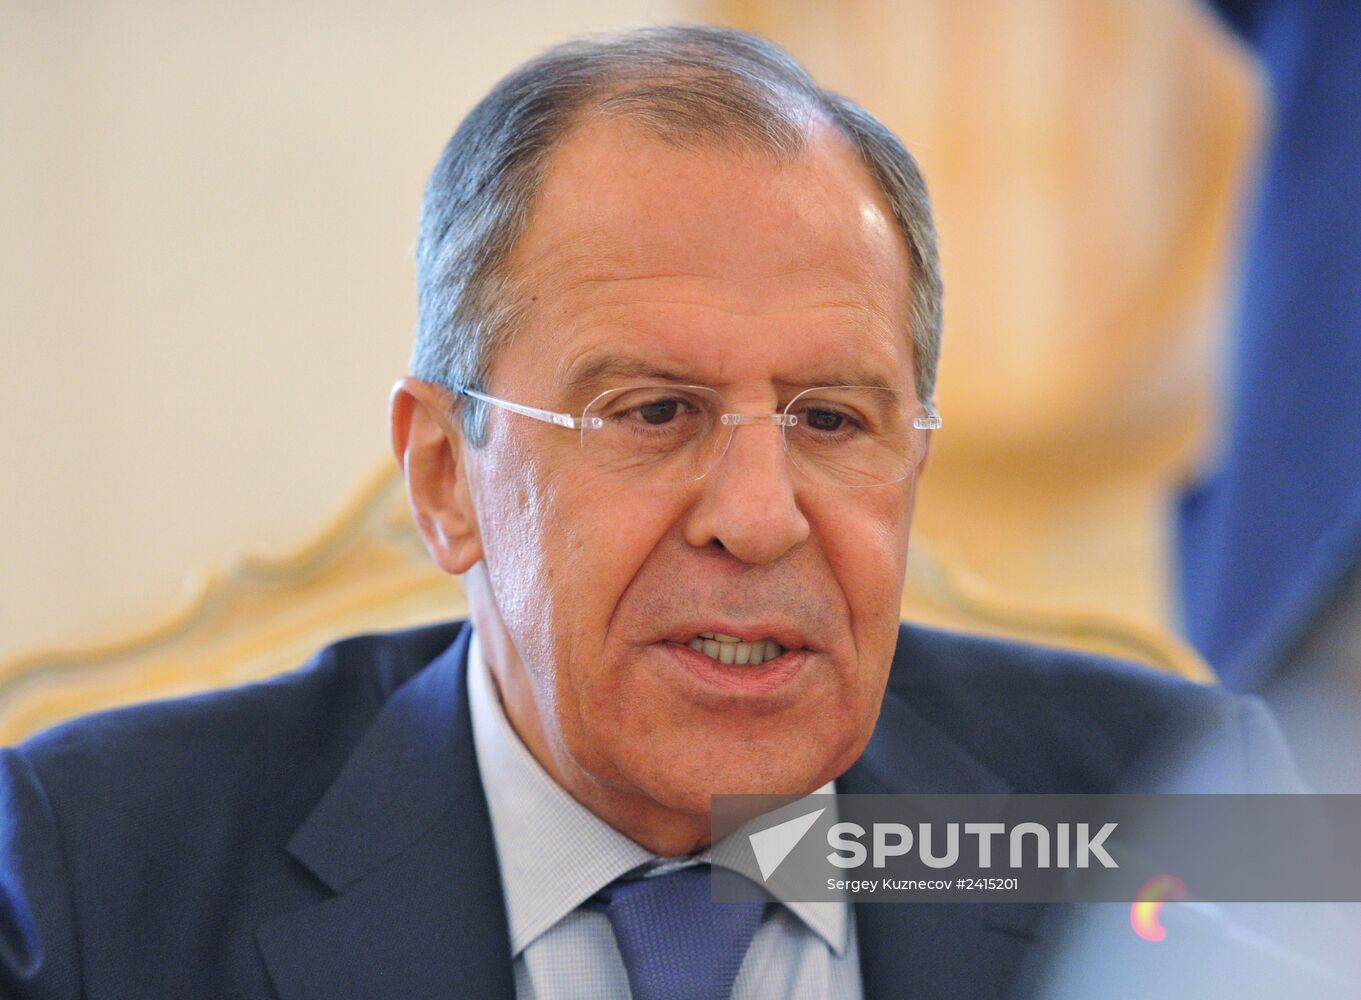 Sergei Lavrov meets with Mozambique's Foreign Minister Oldemiro Balói